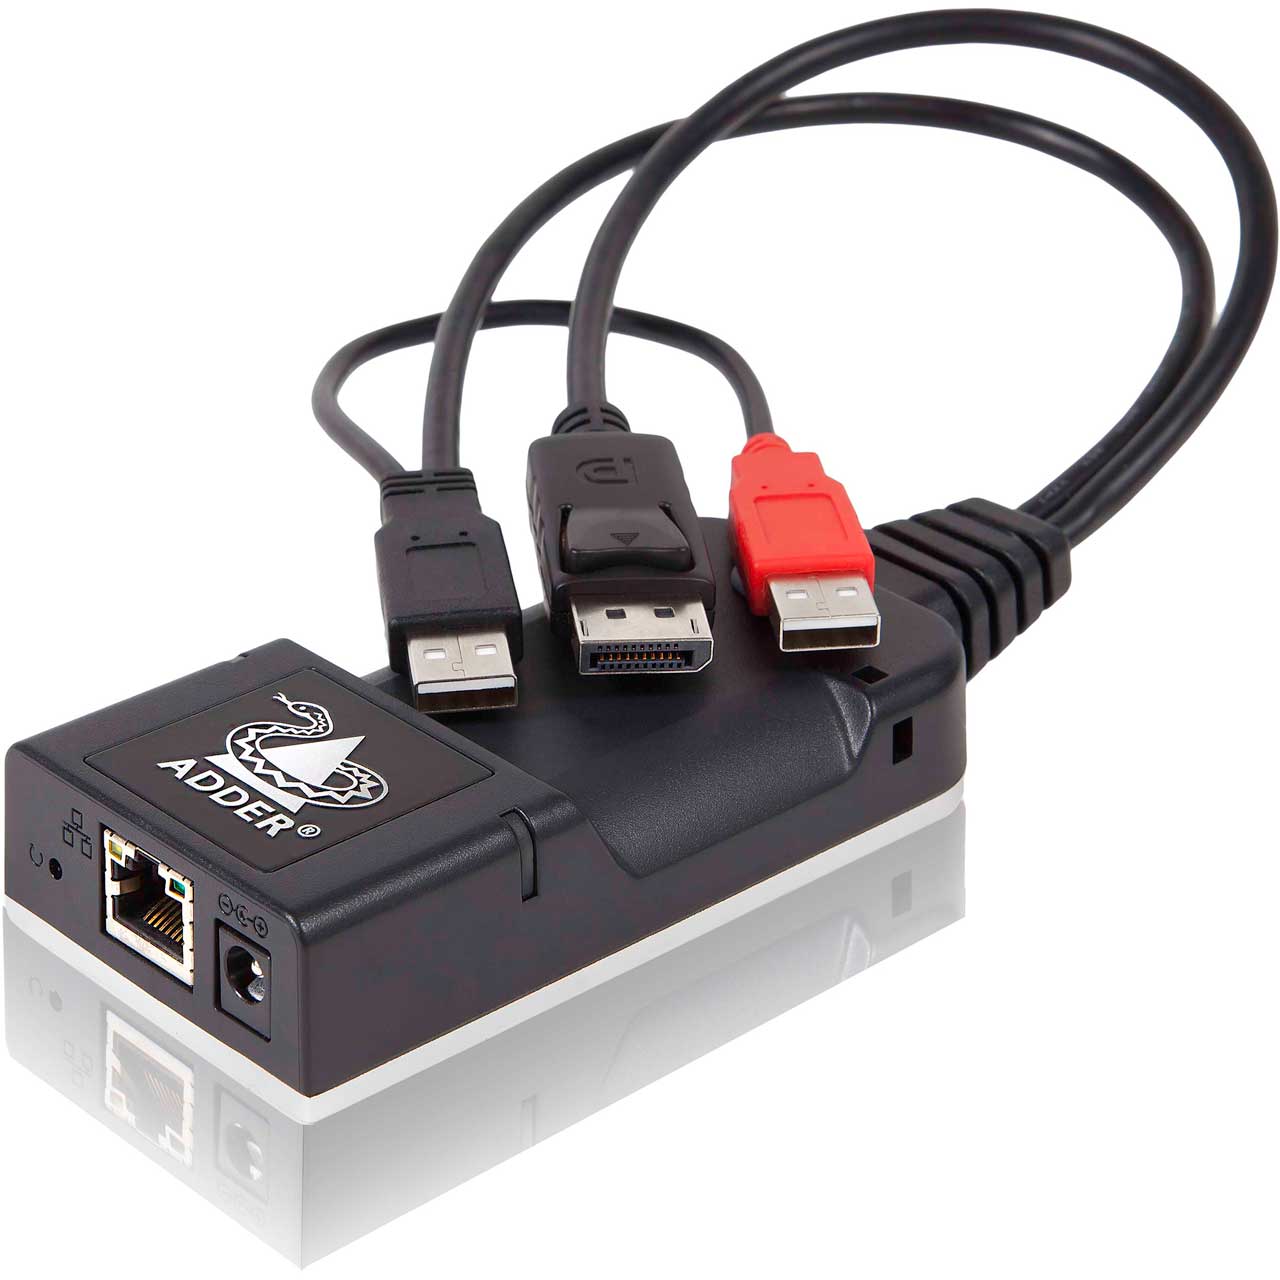 Adder ALIF101T-DP High Performance ZeroU IP KVM Dongle - Extension or Matrix of Video - Audio and USB Over Single Cable  ALIF101T-DP